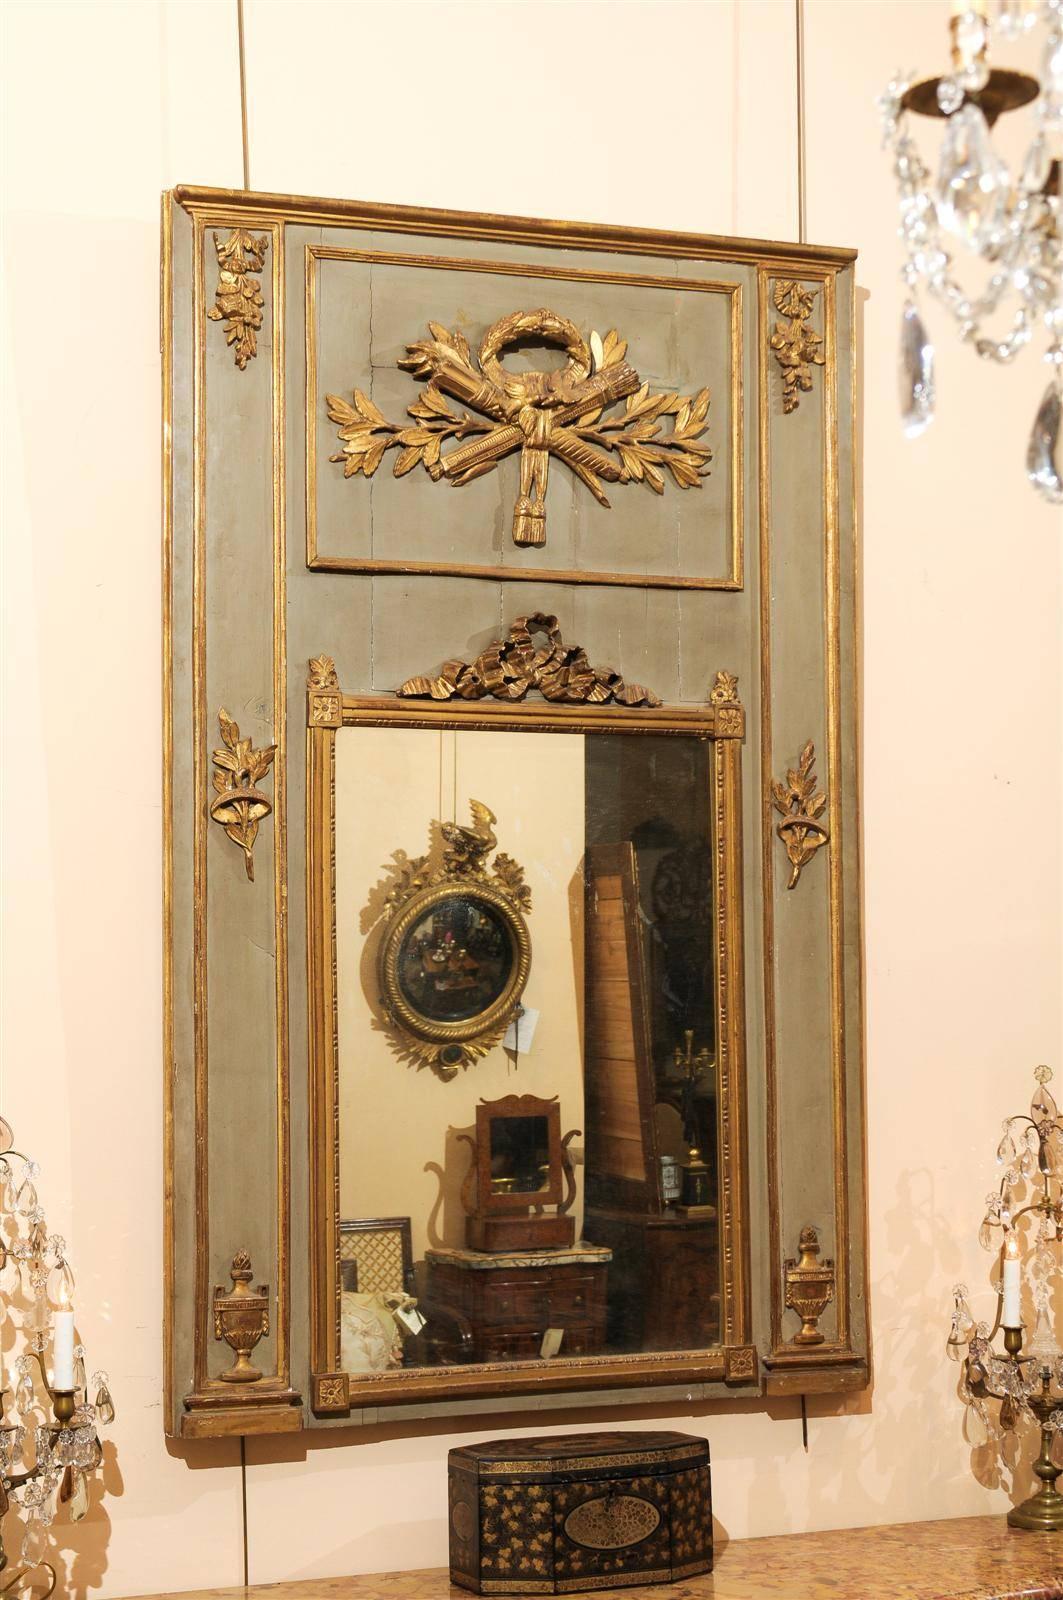 Louis XVI period painted and parcel-gilt trumeau mirror with neoclassical carvings.